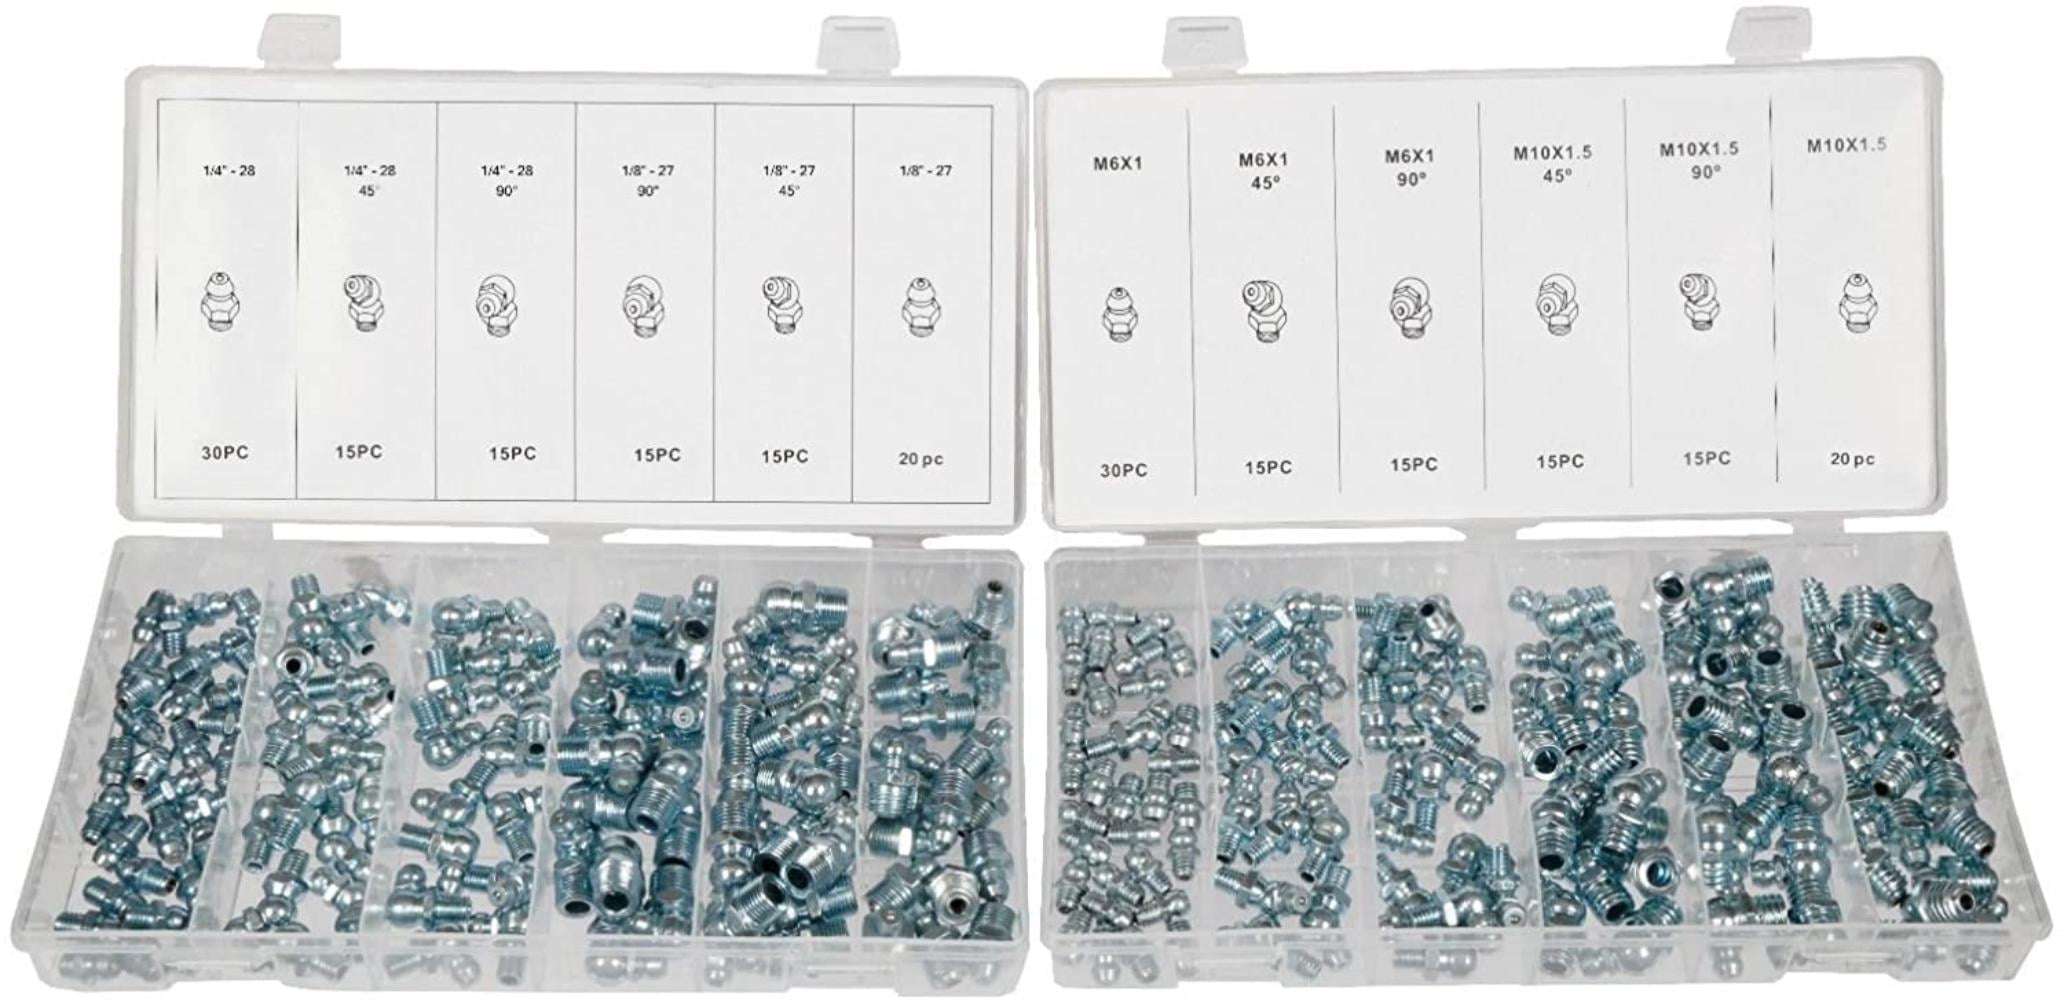 110pc Metric Hydraulic Grease Fitting Assortment Set 